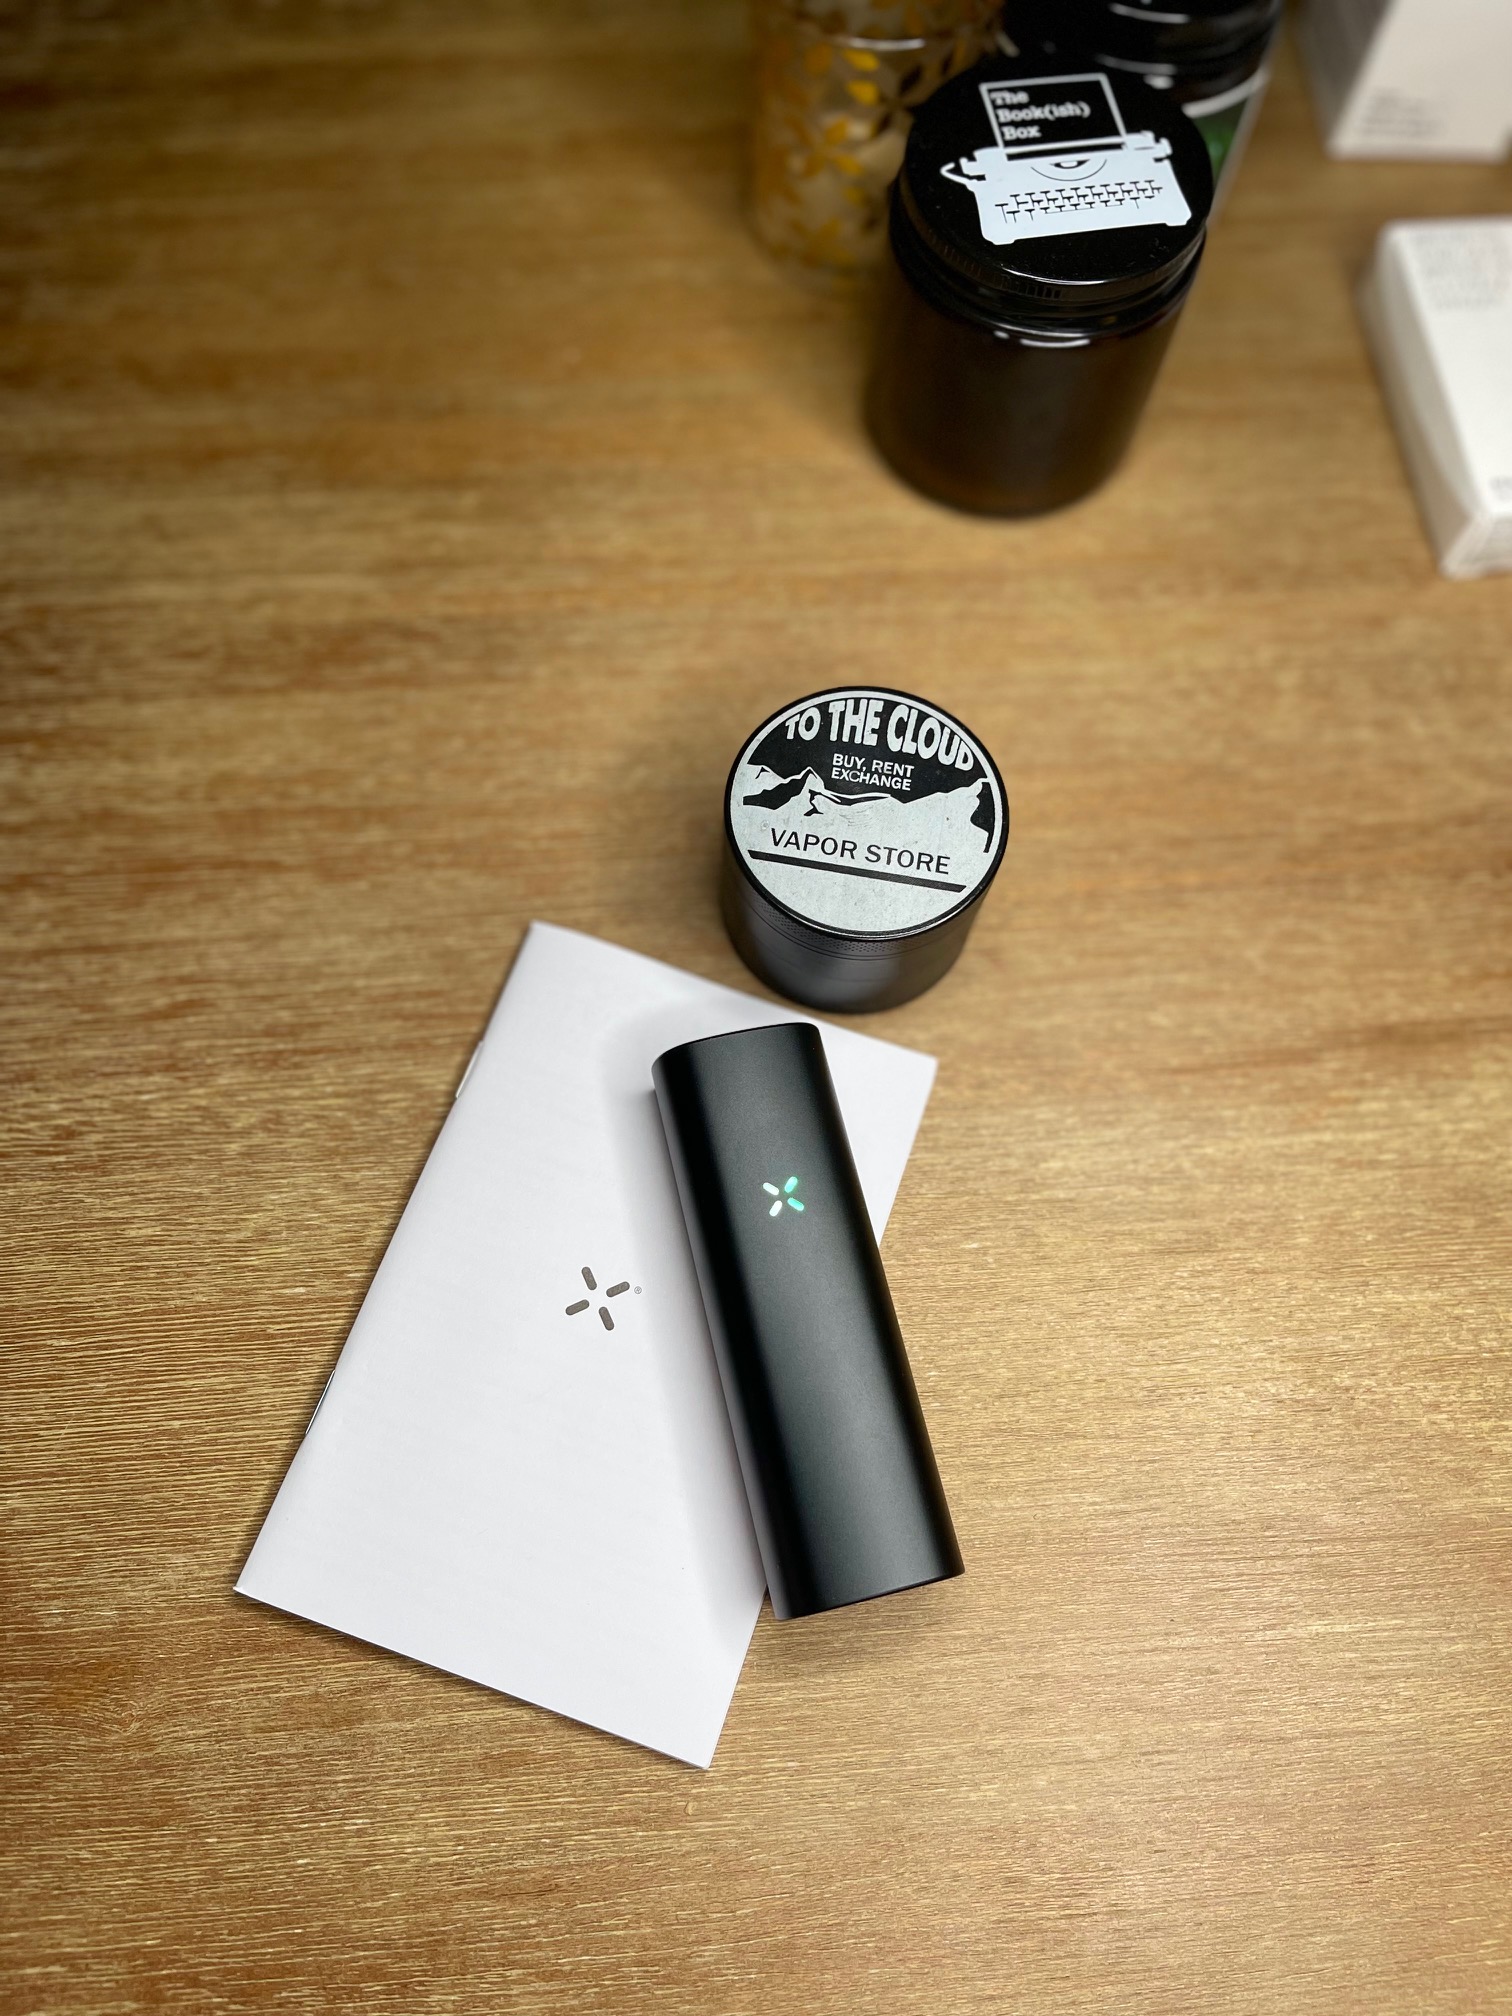 Pax 3: Unboxing & How to Use 